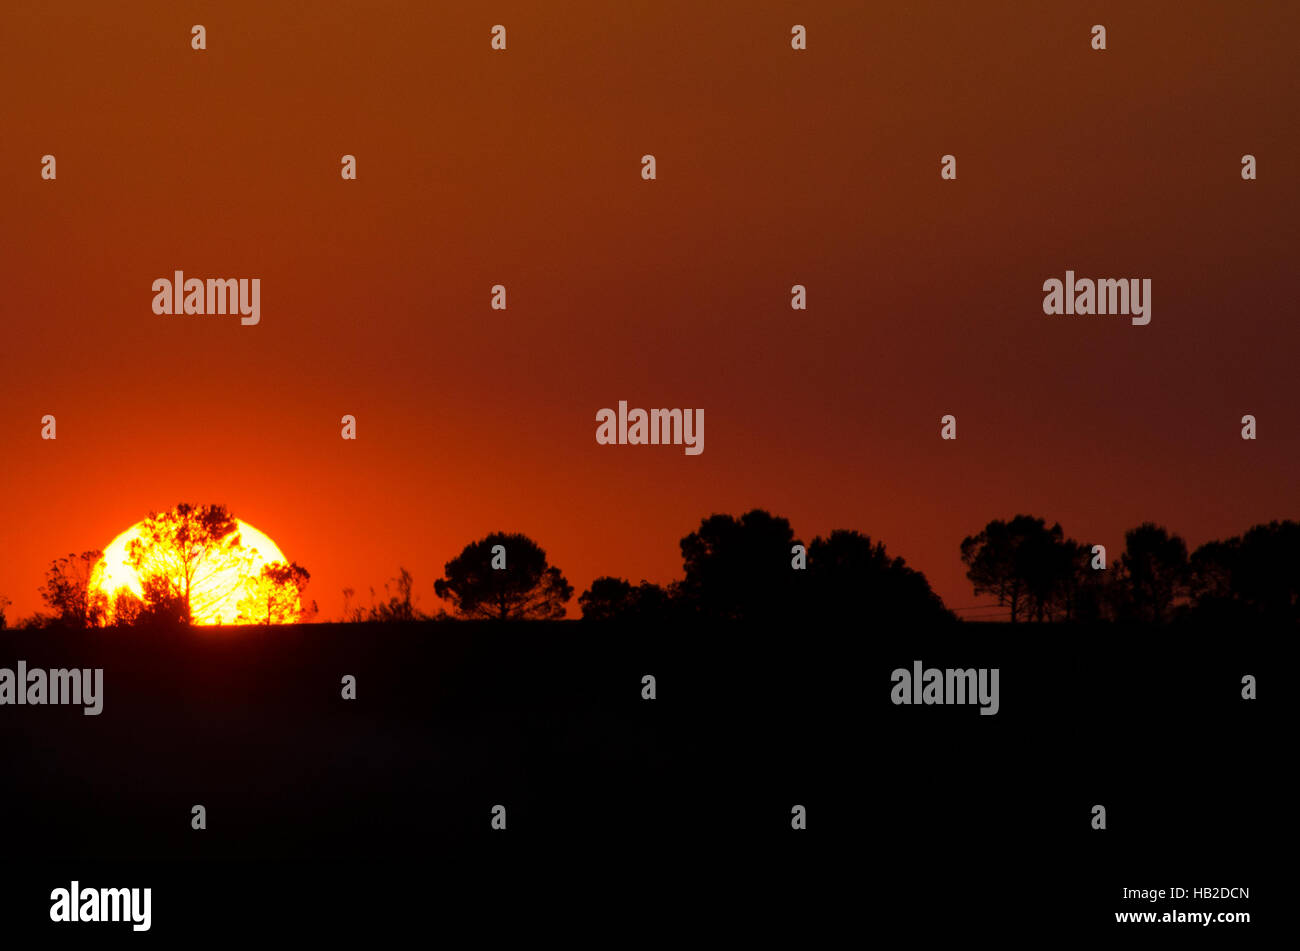 Beautiful landscape image with trees silhouette at sunset, Spain Stock Photo